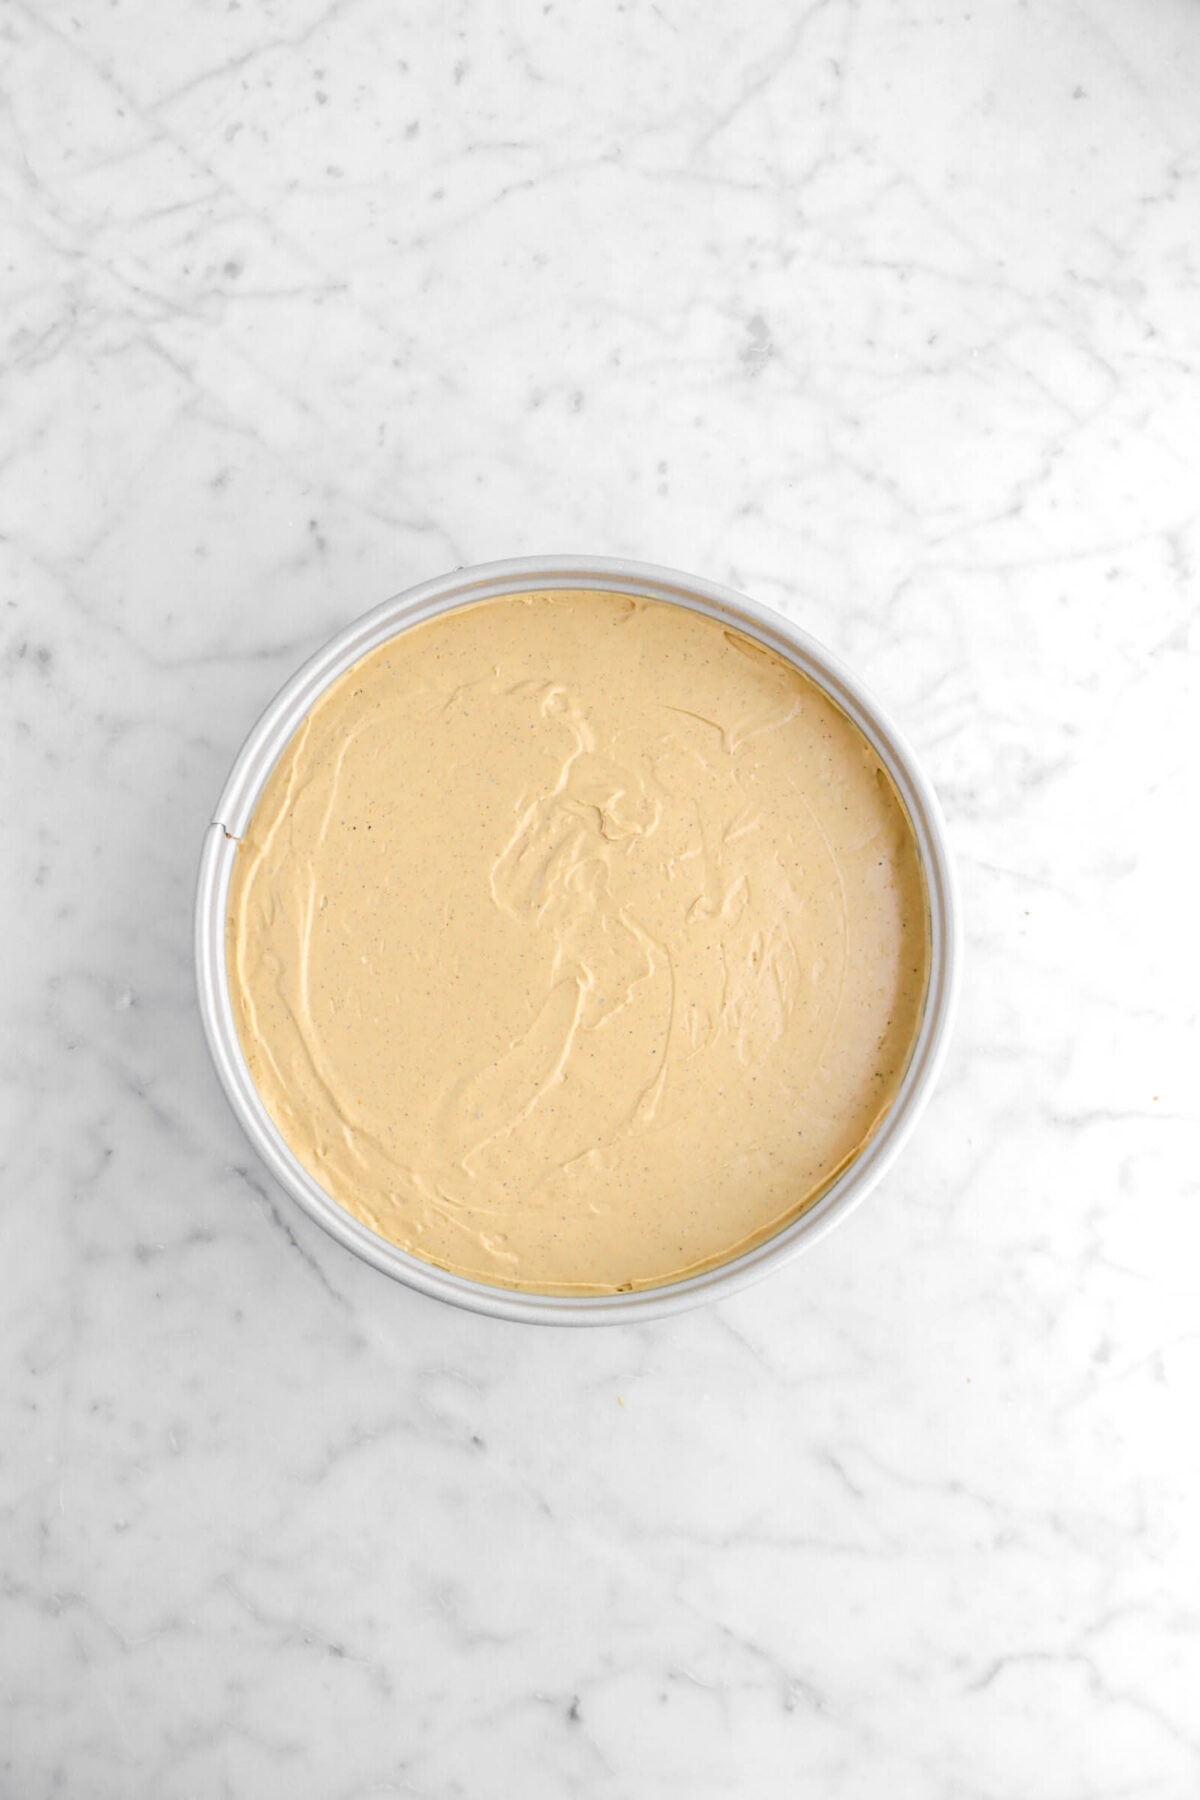 cheesecake spread smoothly in springform.